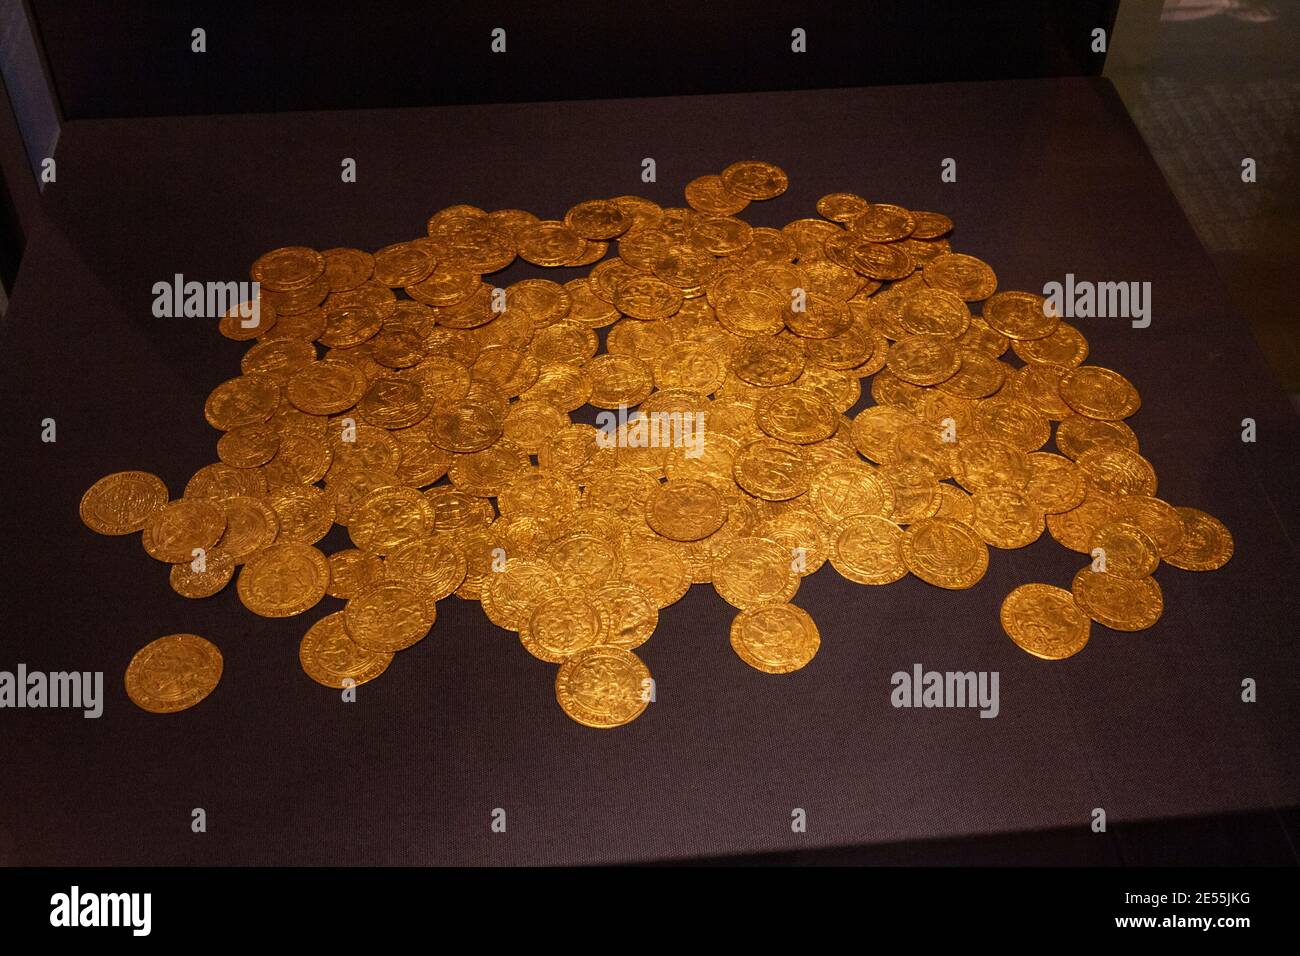 The Asthall hoard of gold coins, Ashmolean Museum, the University of Oxford's museum of art and archaeology, Oxford UK. Stock Photo